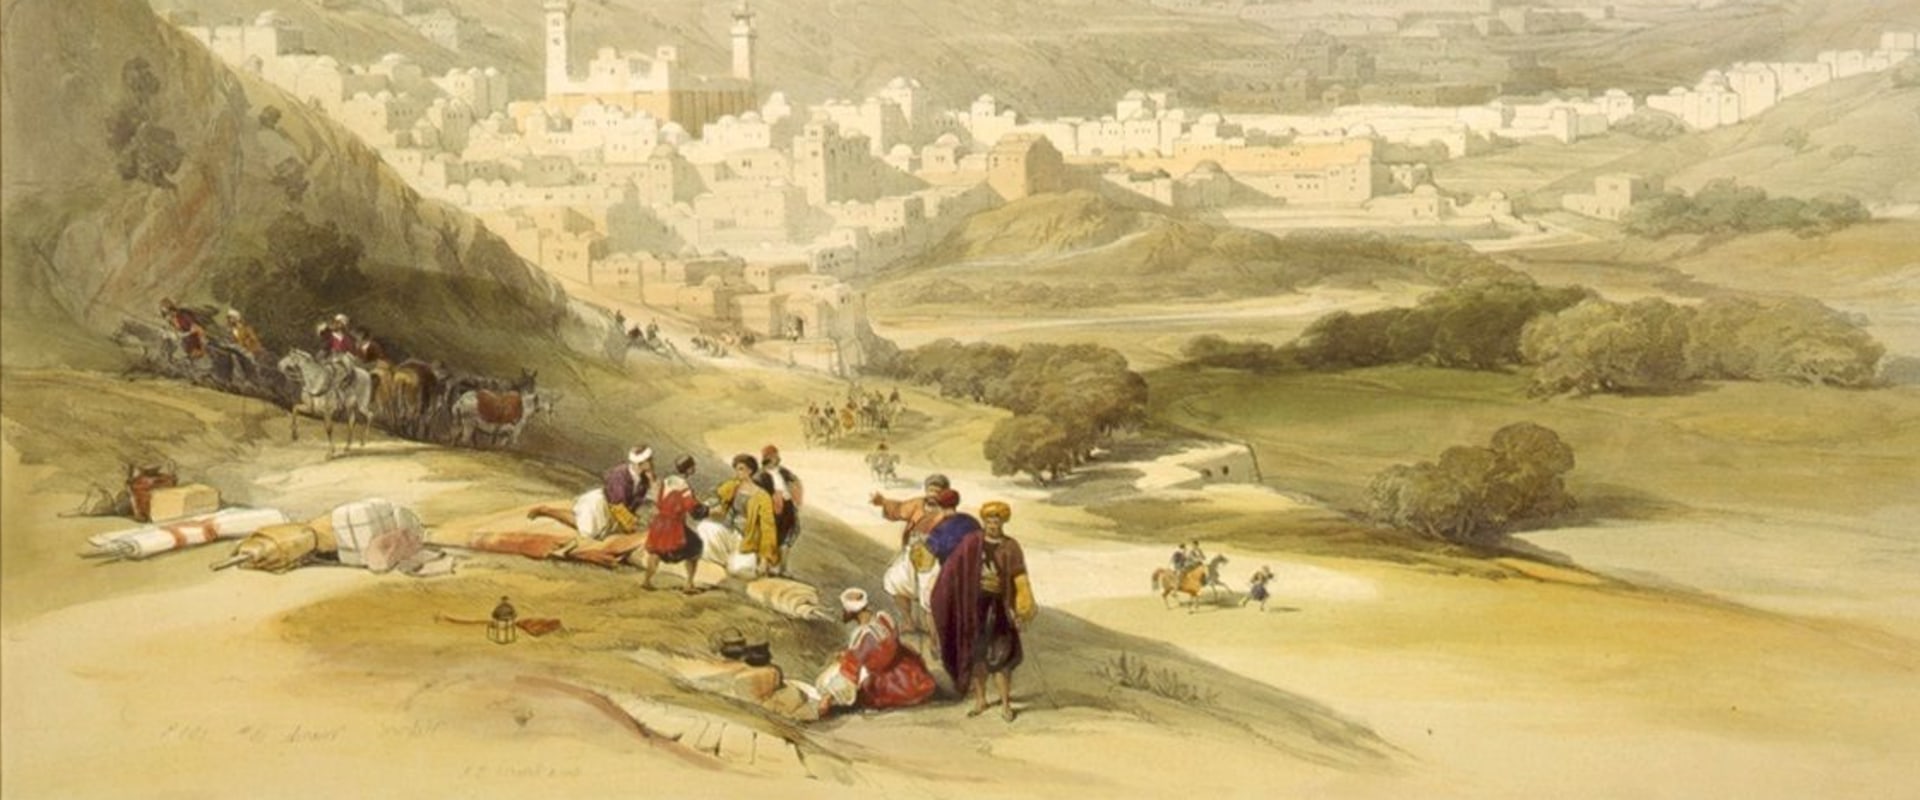 The History of Hebron's Name